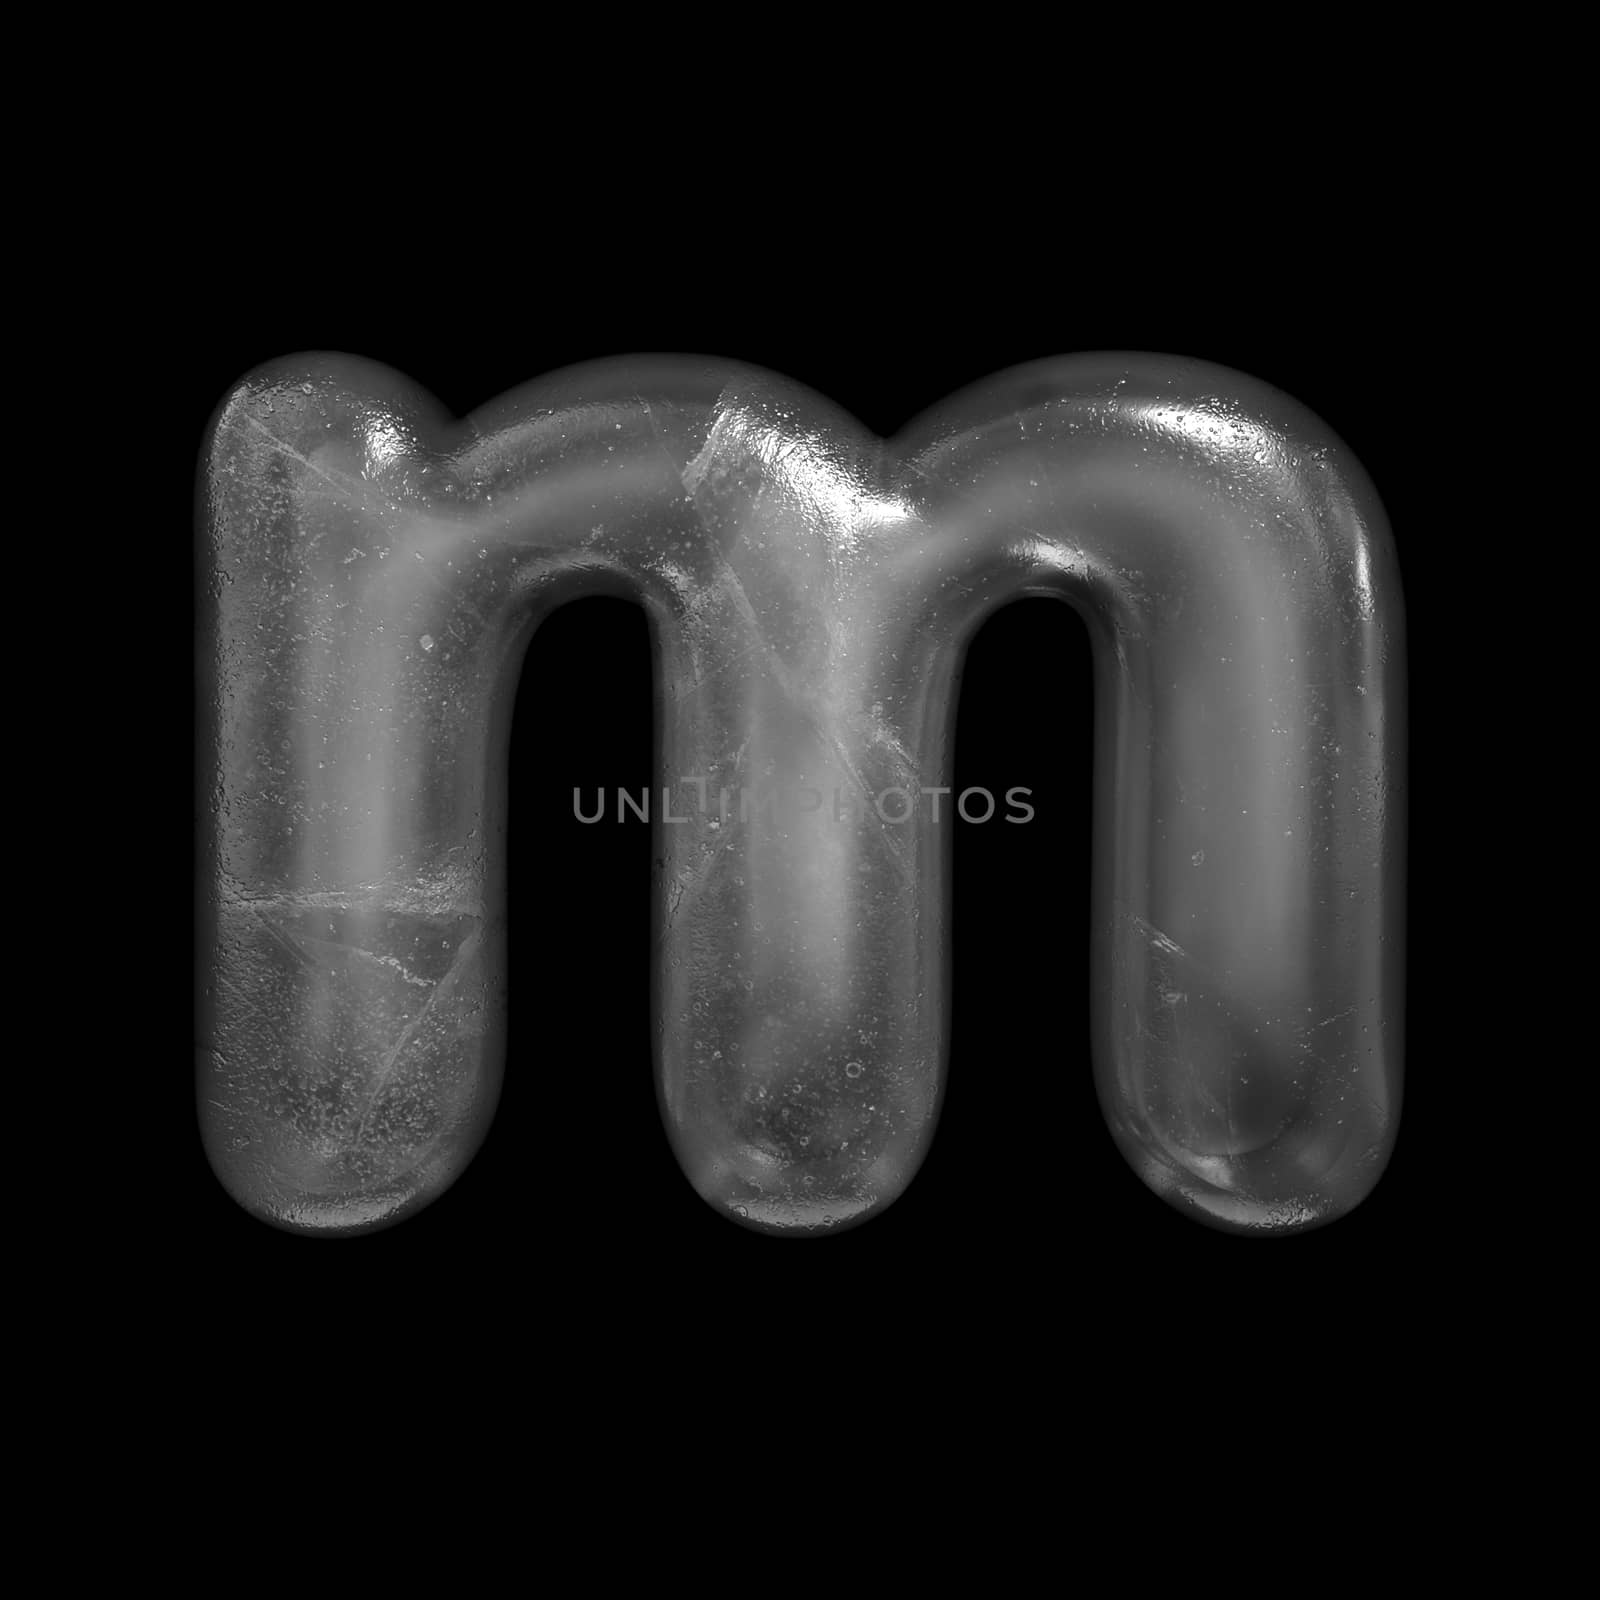 Ice letter M - Small 3d Winter font isolated on black background. This alphabet is perfect for creative illustrations related but not limited to Nature, Winter, Christmas...